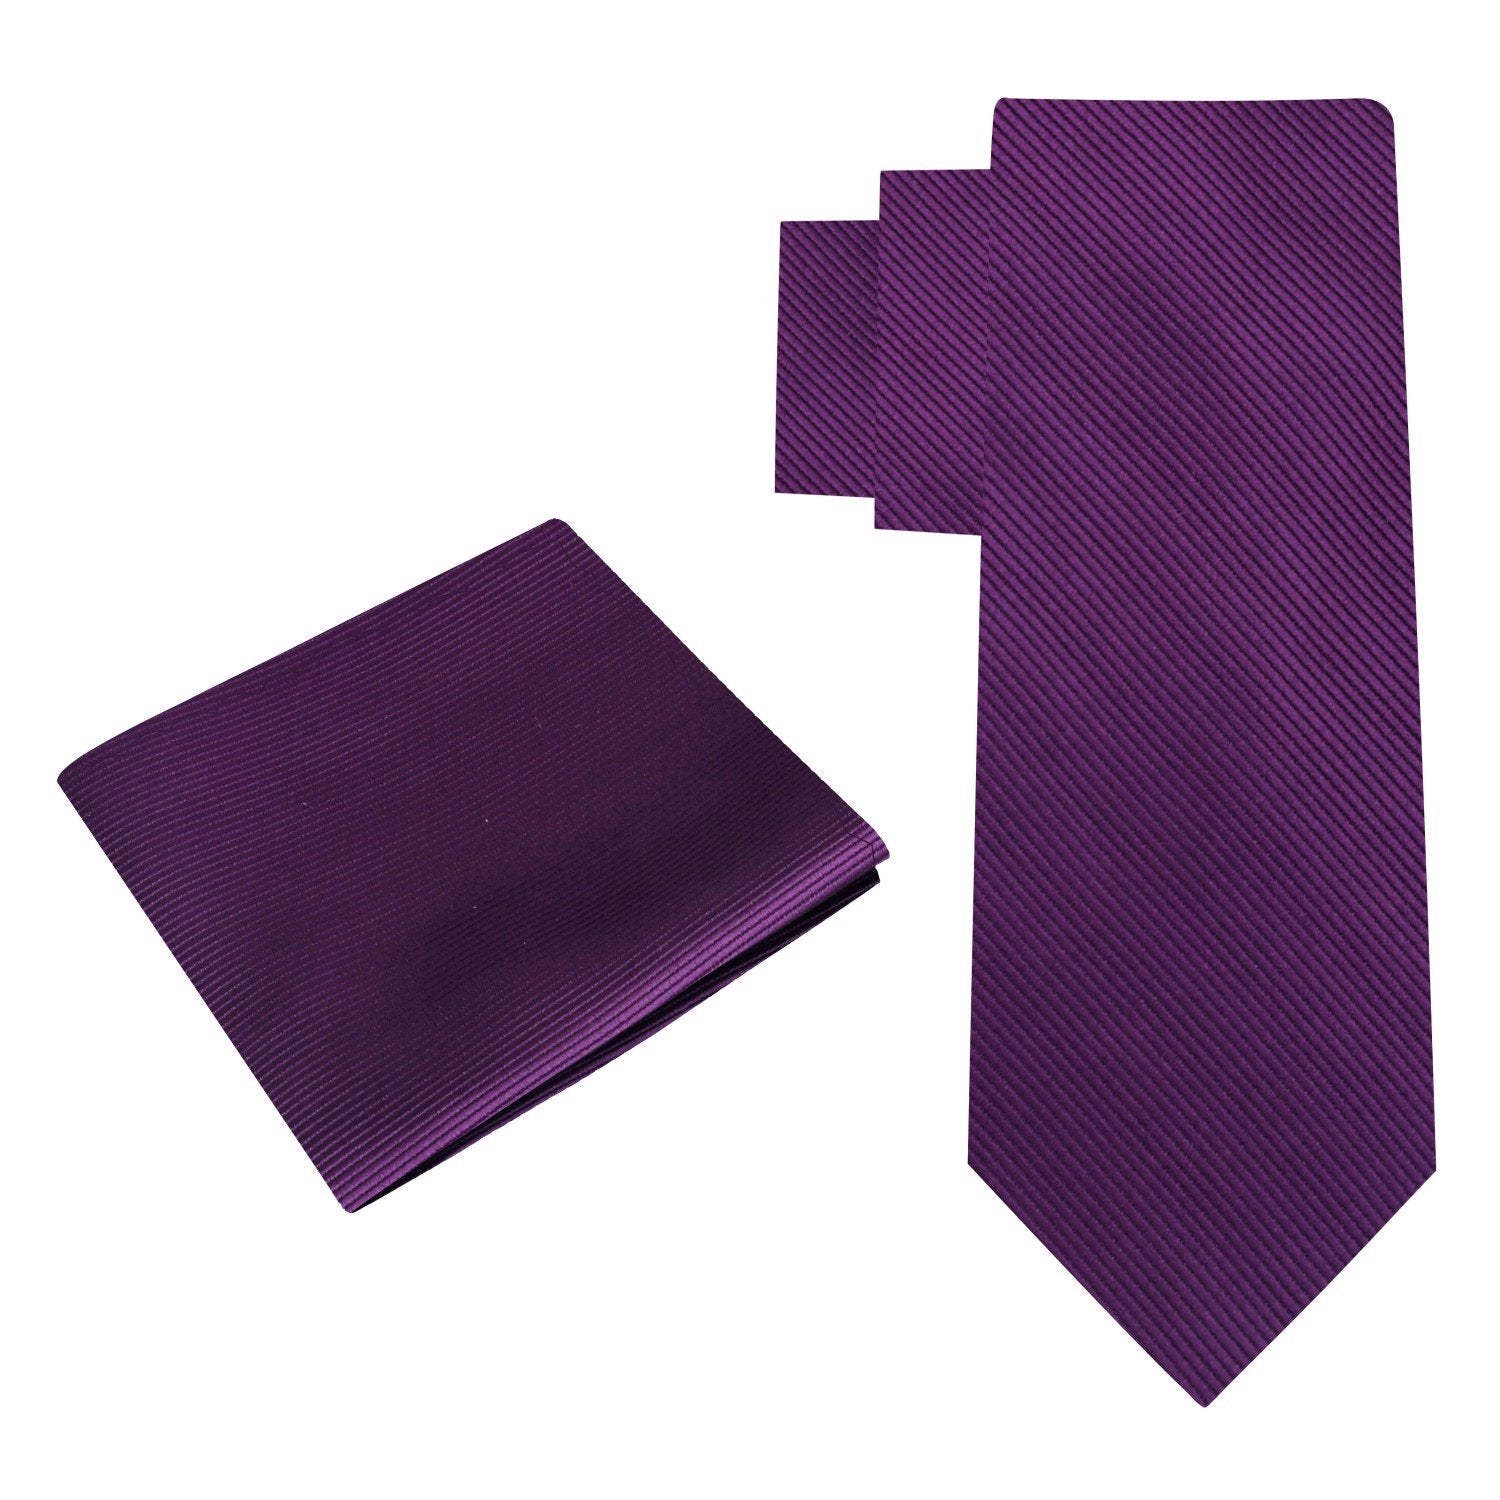 Alt View: A Solid Deep Purple Colored Silk Necktie With Matching Pocket Square ||Purple